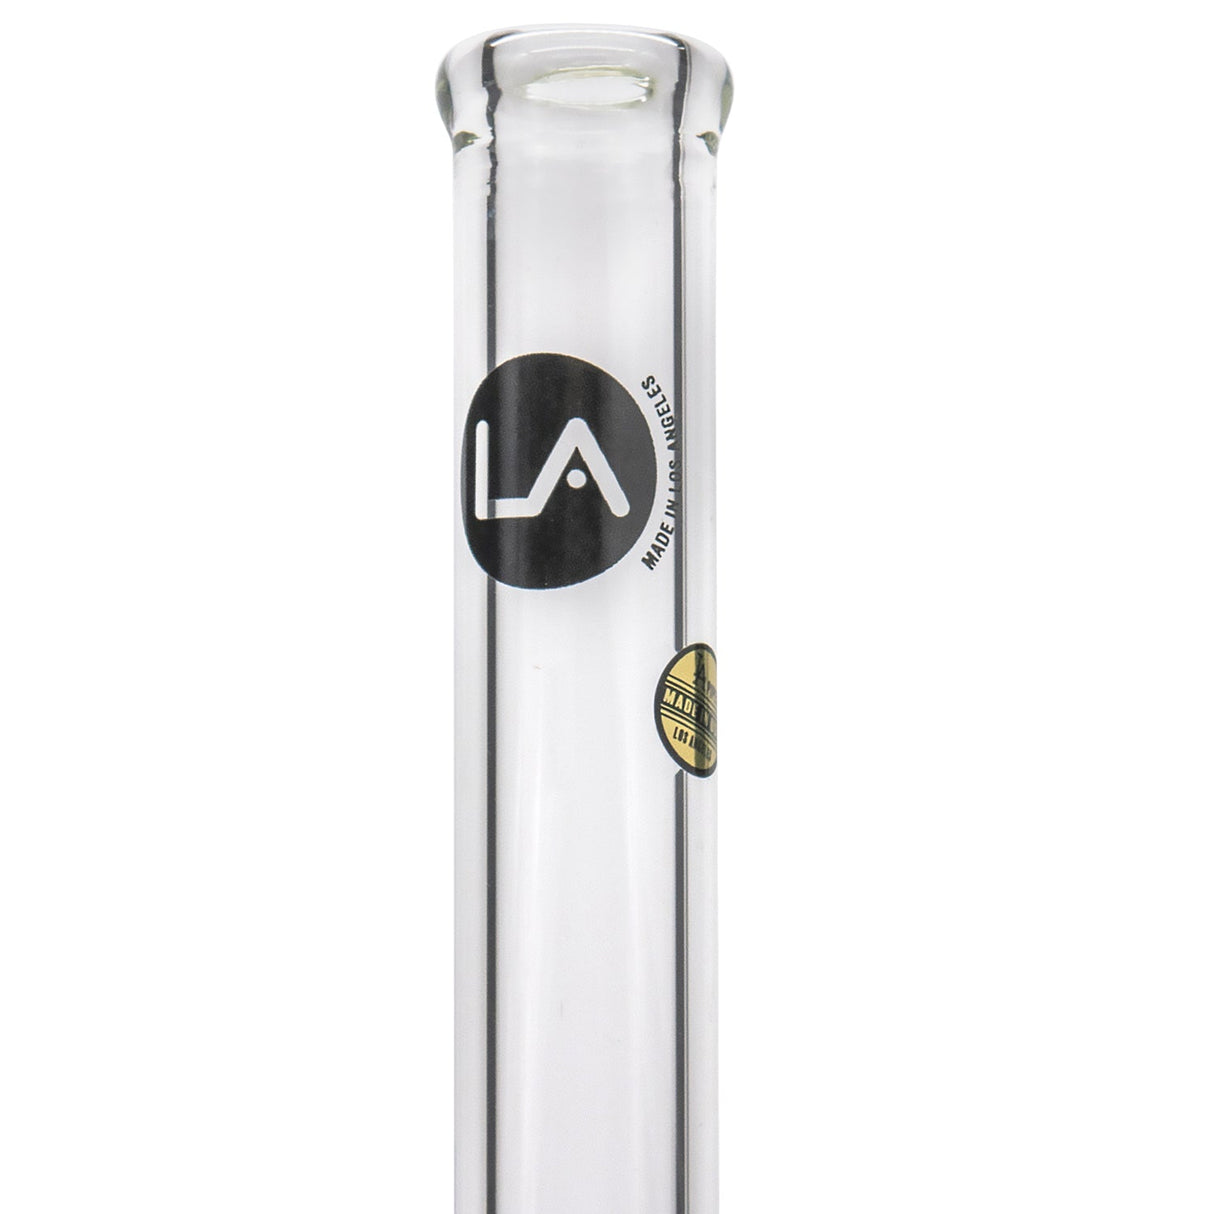 LA Pipes 14" Slim Straight Glass Waterpipe Front View on Seamless White Background